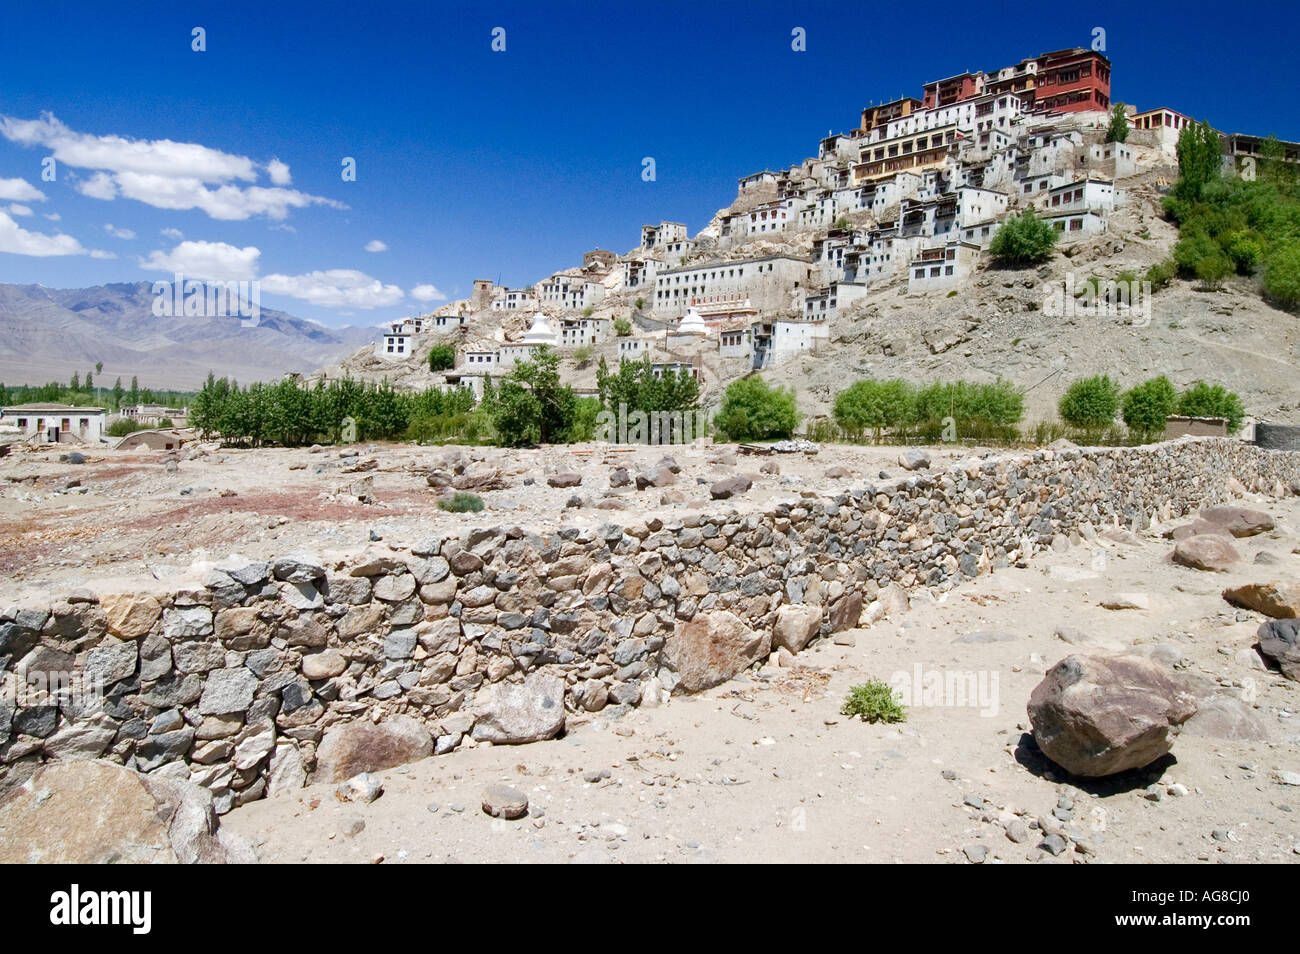 Thikse, Thiksey, Thiksay monastery in Ladakh, Indus valley, Jammu and Kashmir, India Stock Photo